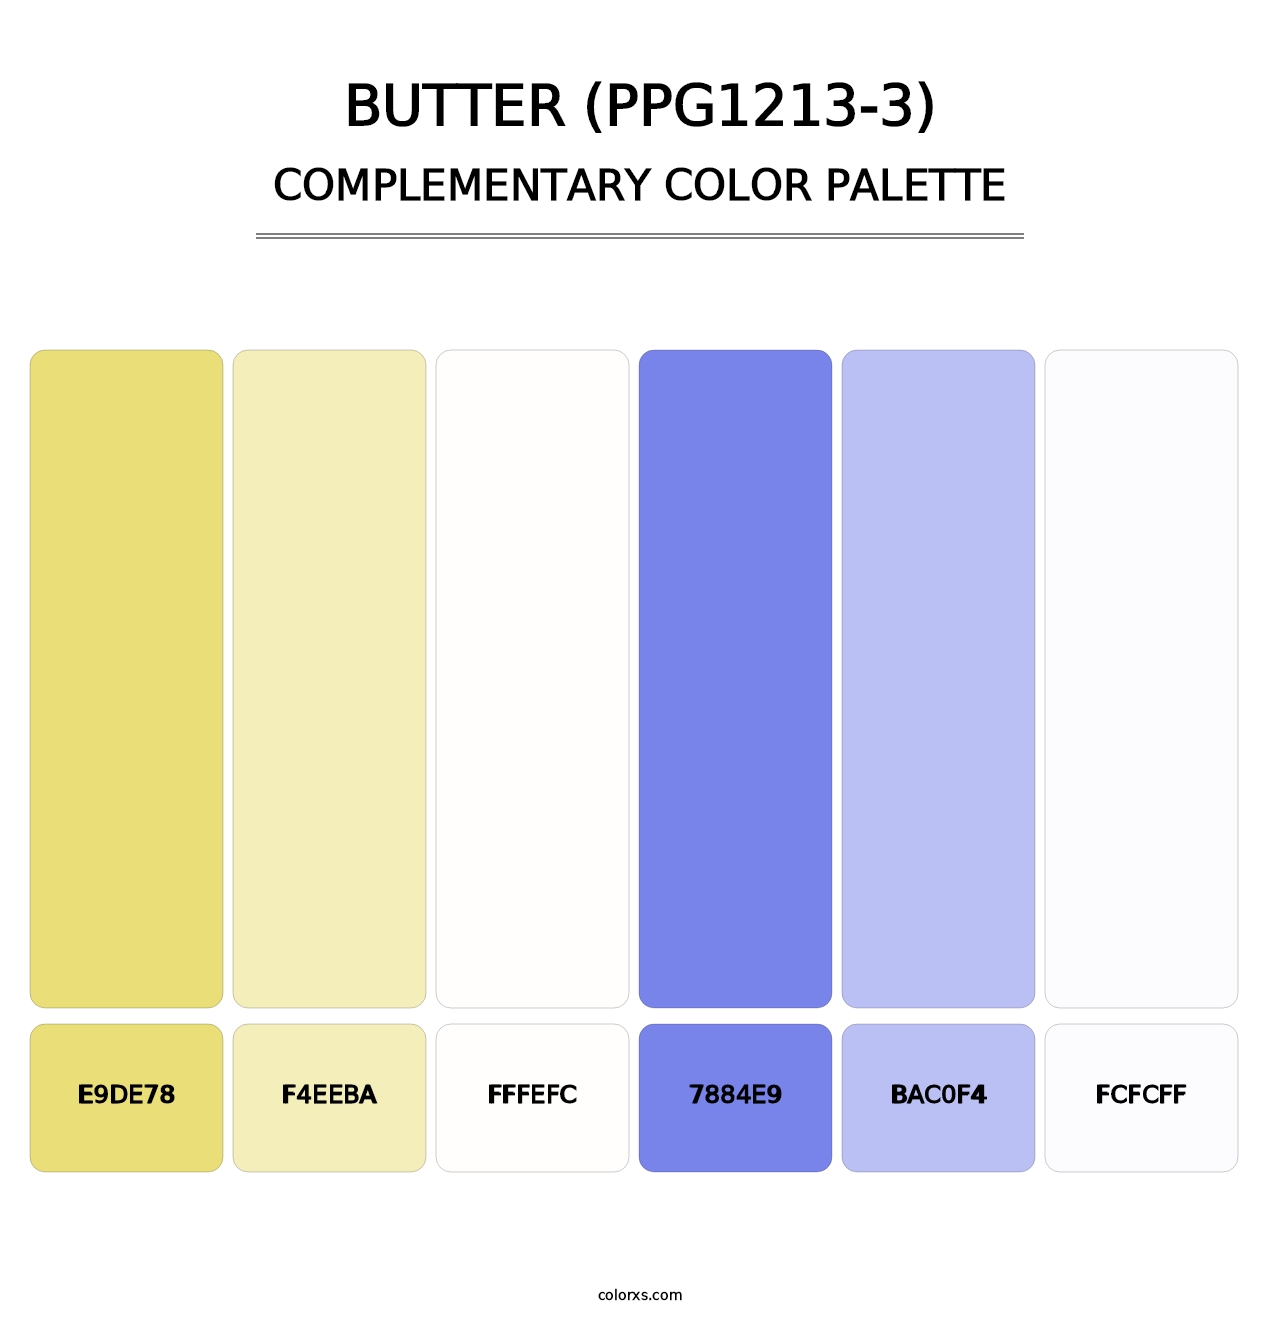 Butter (PPG1213-3) - Complementary Color Palette